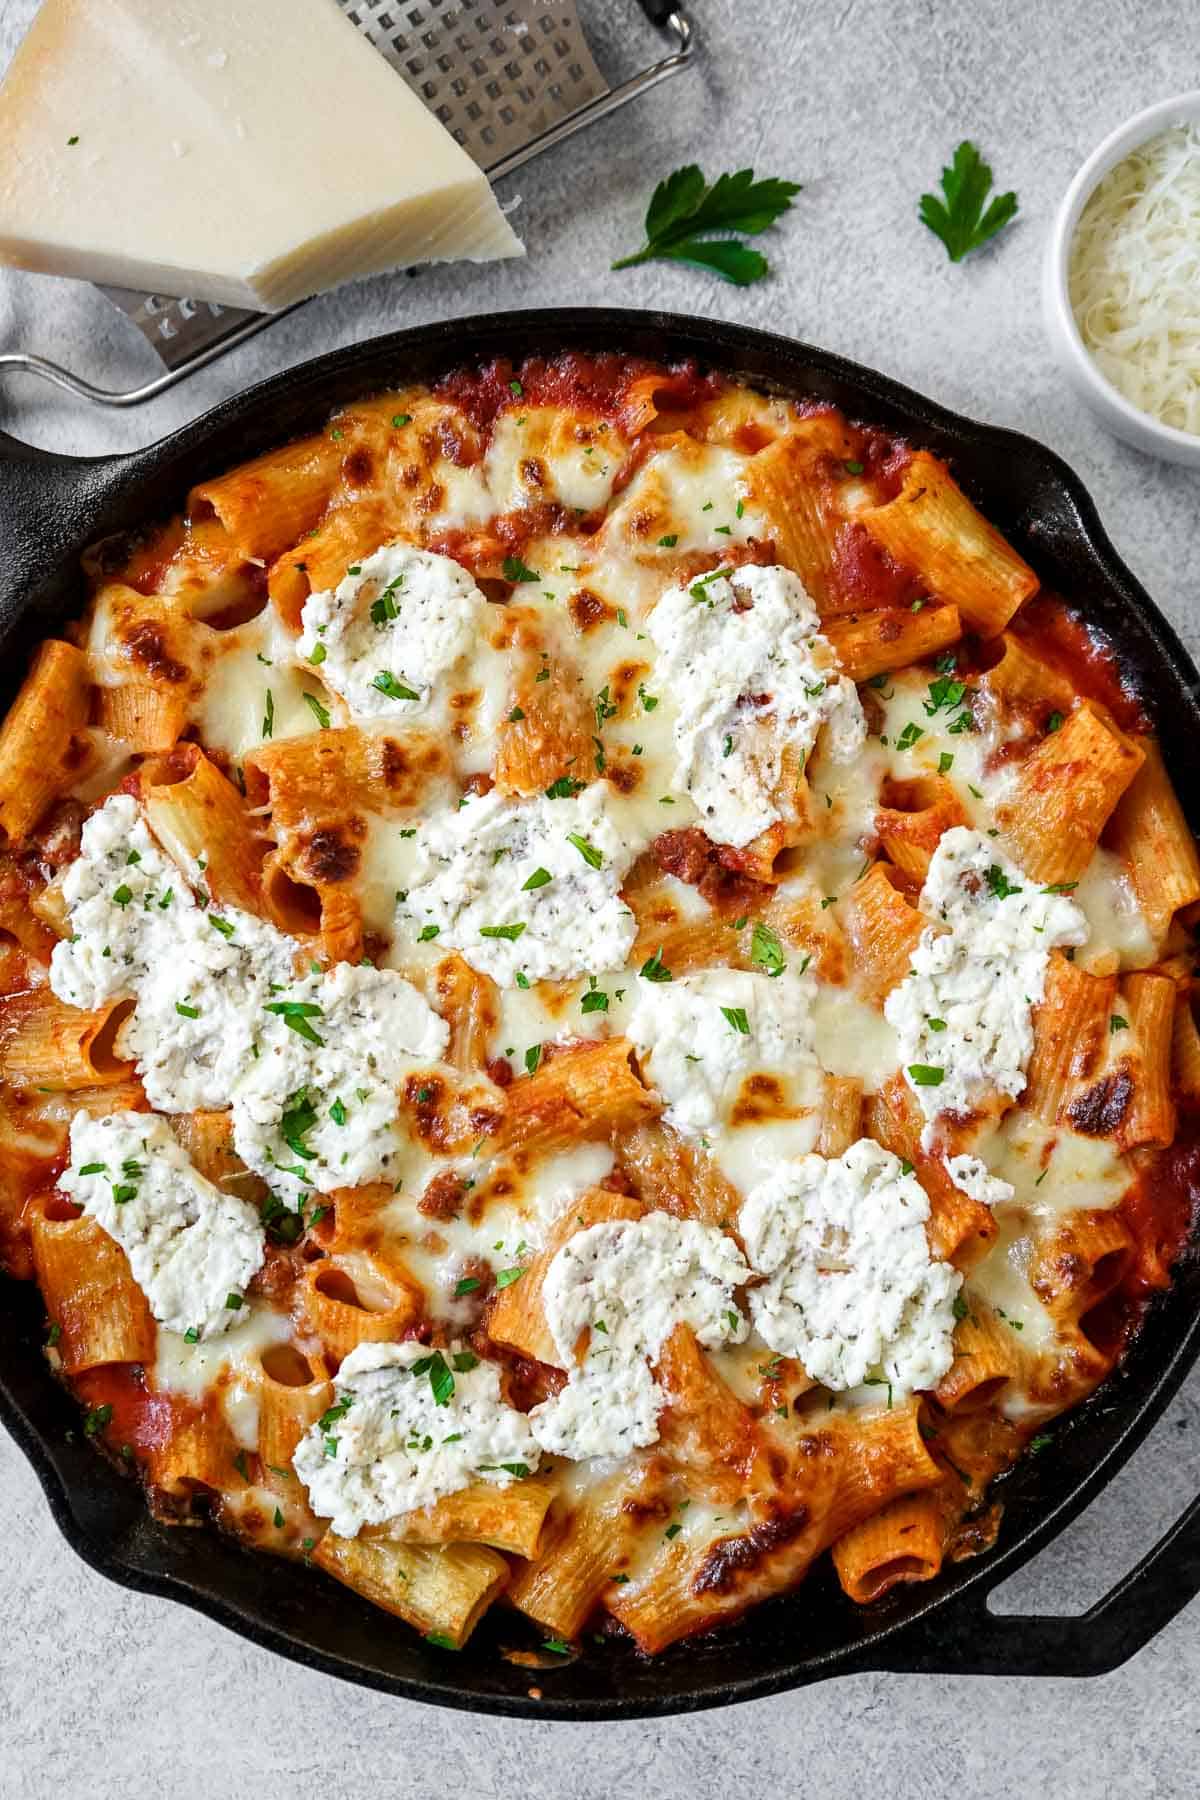 A skillet filled with ground sausage pasta and cheese.